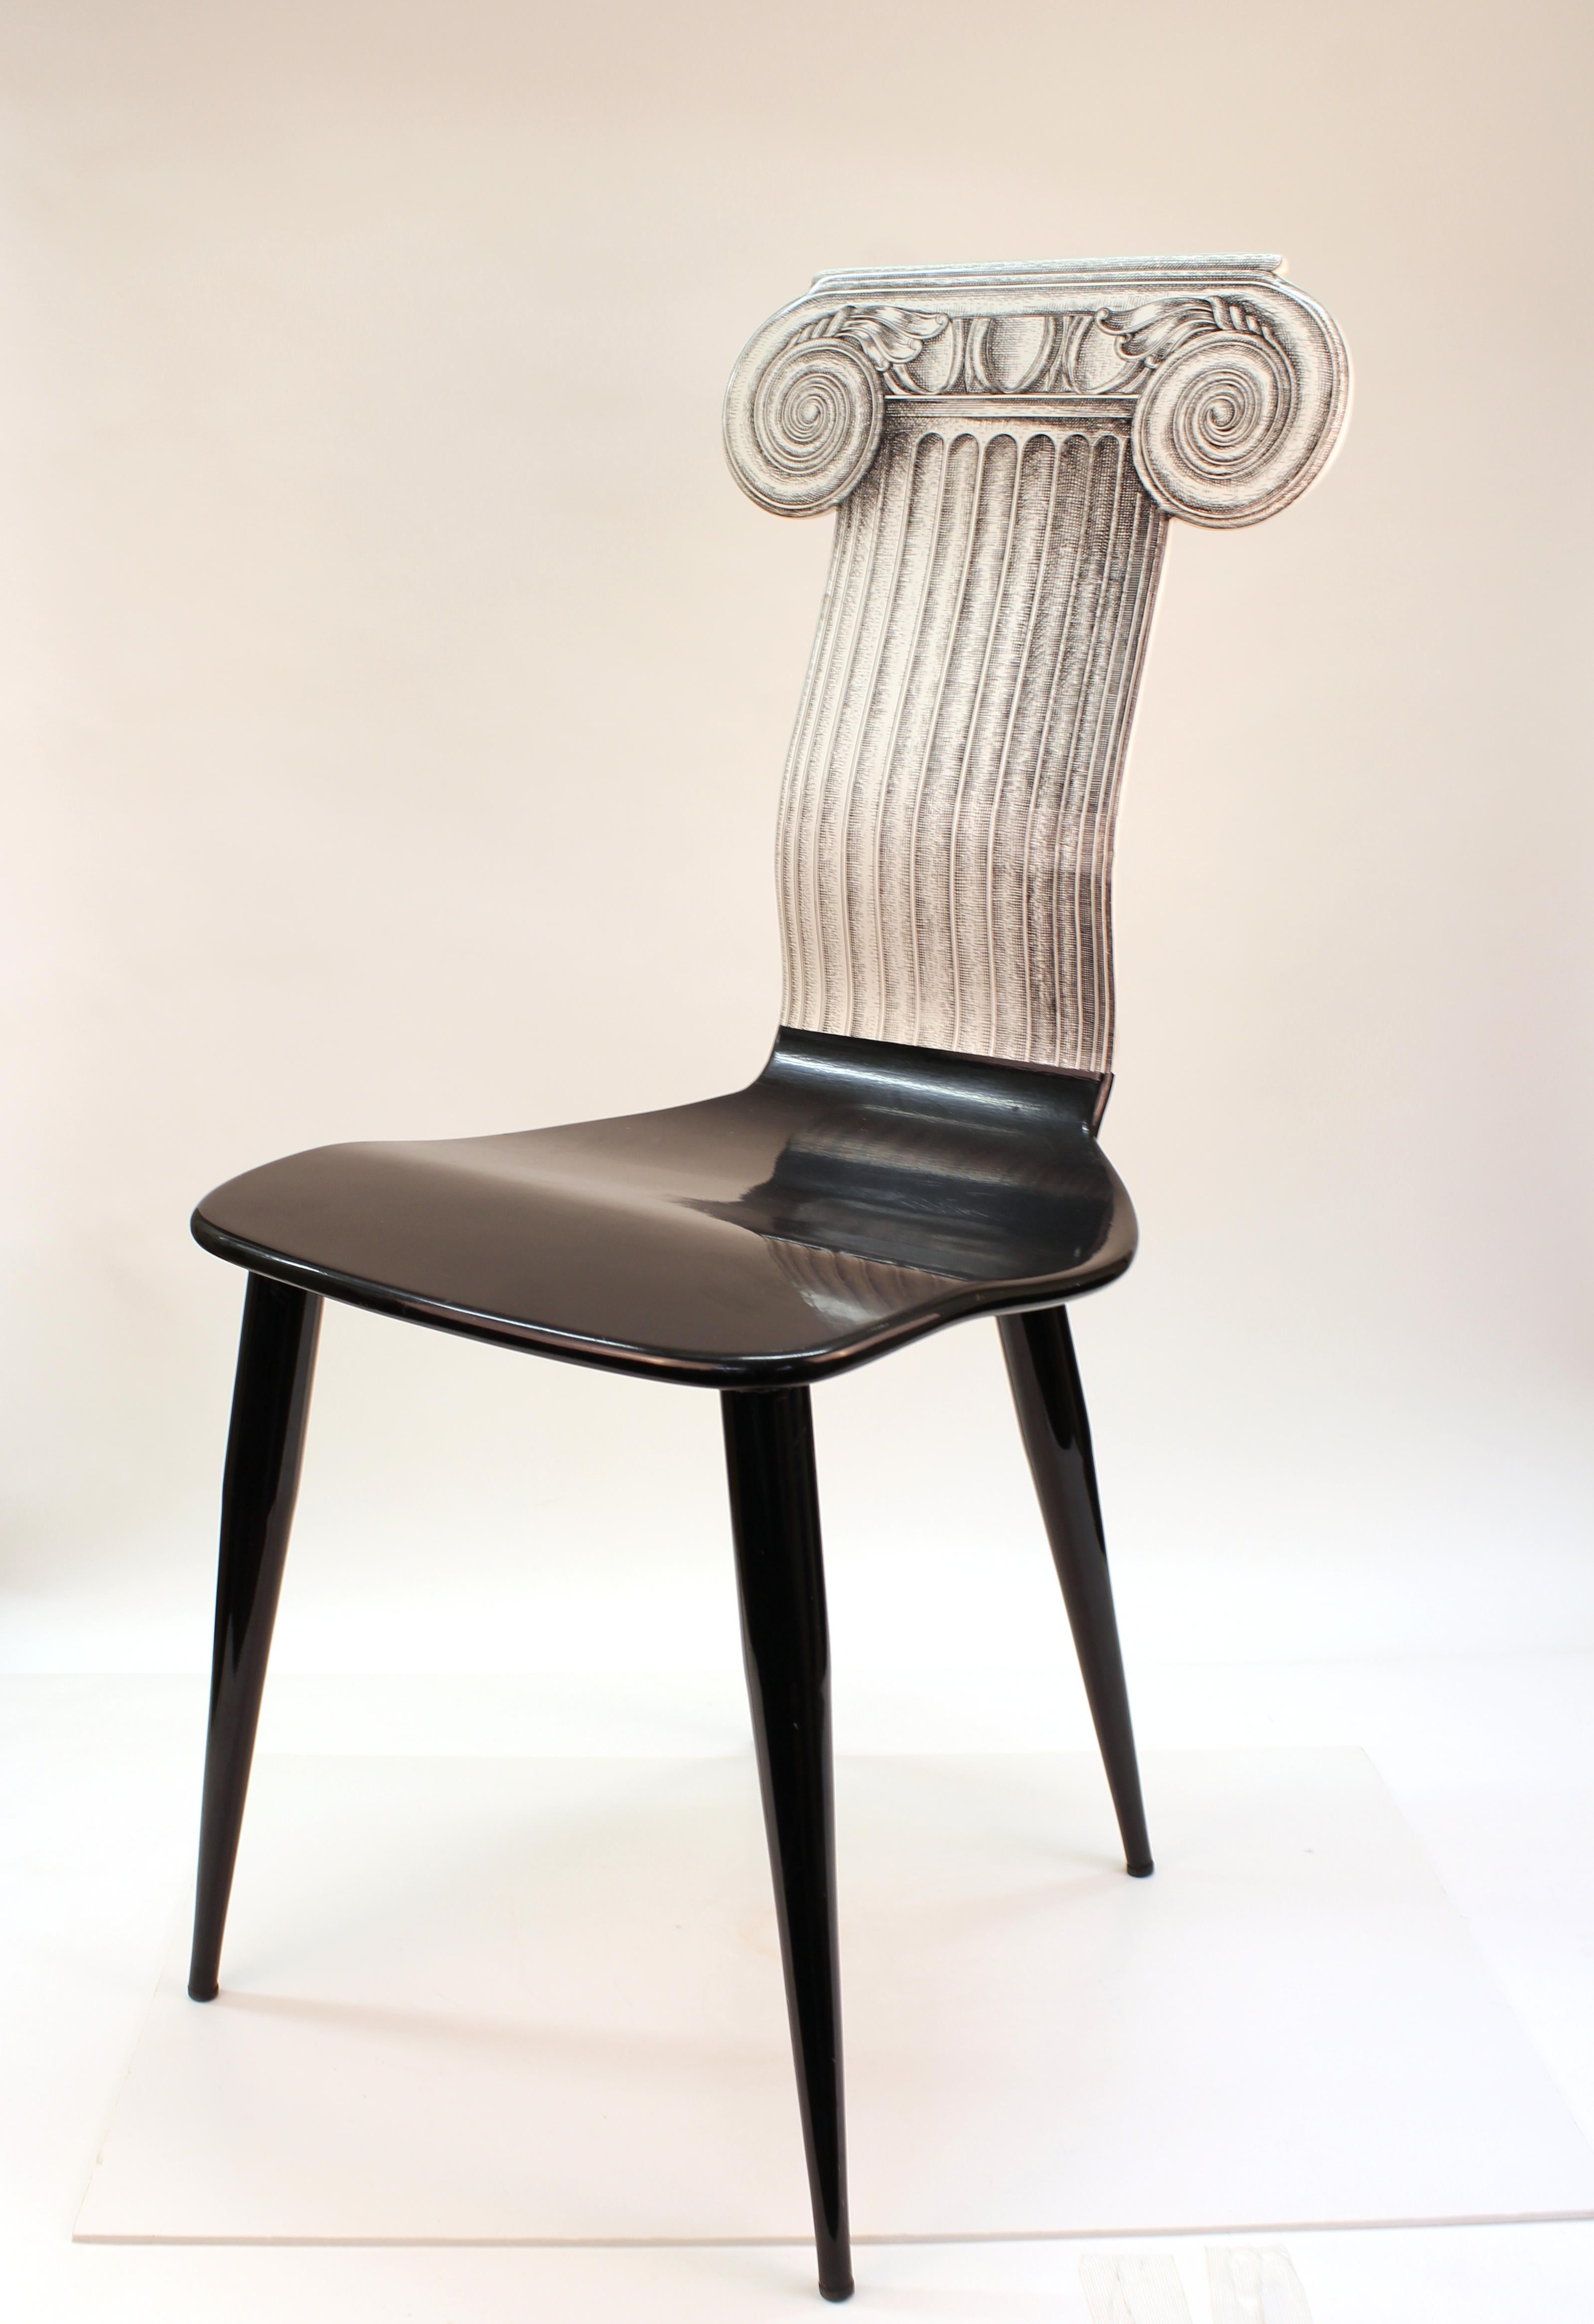 Fornasetti 'Capitello Ionico' lacquered wooden chair in black with enameled metal legs and a lithographically applied graphic of the upper section of a classical Ionic order column on its back. The piece has a label and number (18H). In great